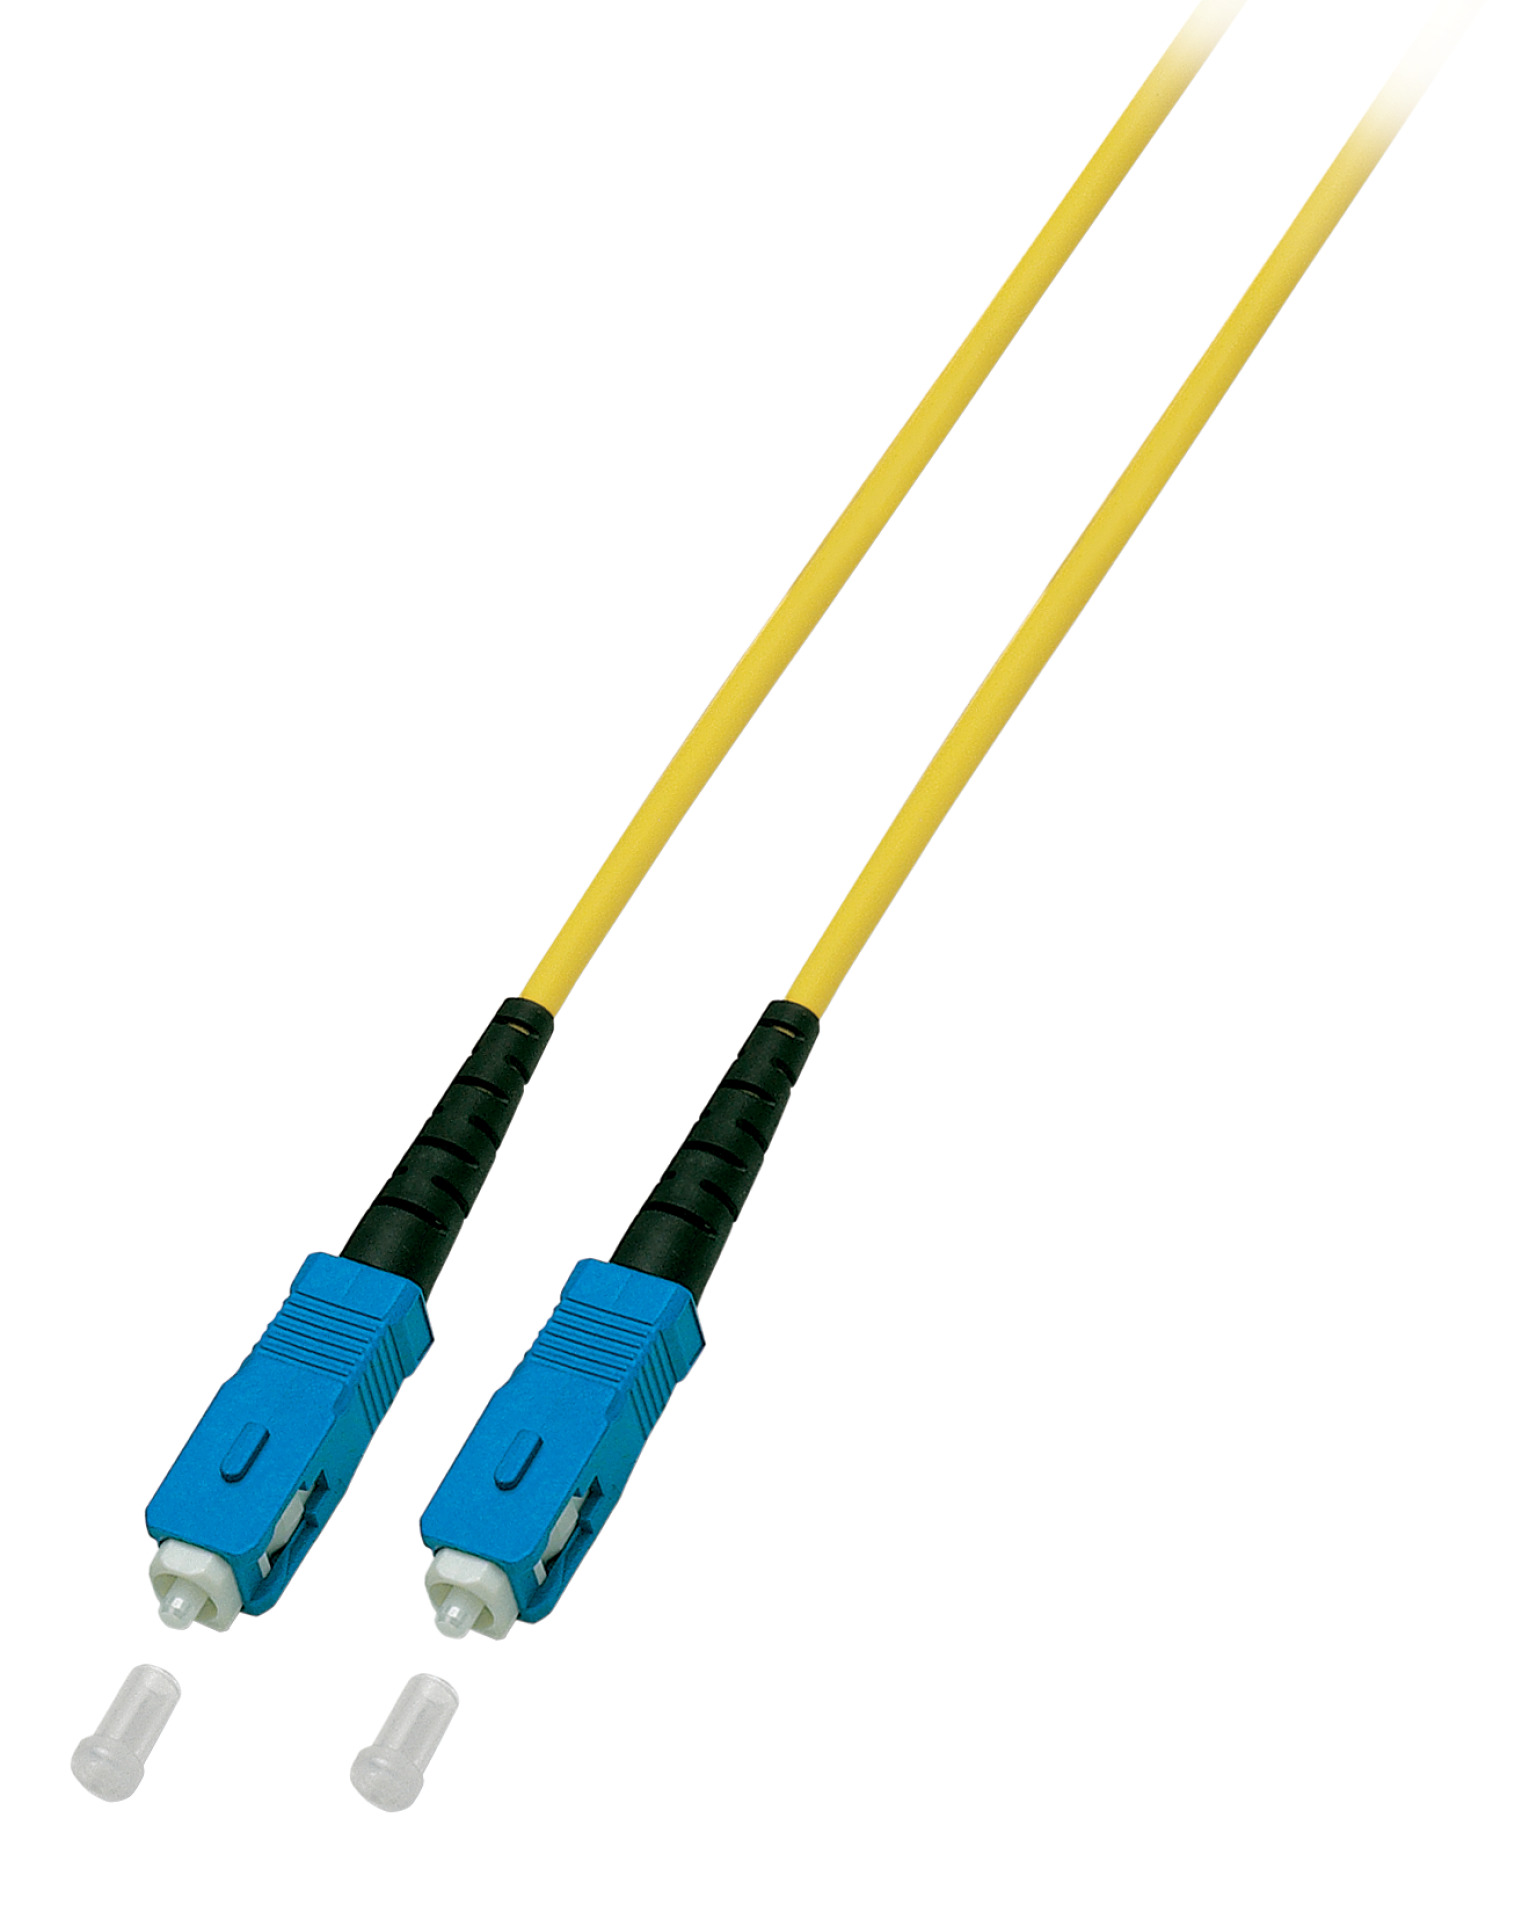 Simplex FO Patch Cable SC-SC G657.A2 3m 3,0mm yellow 9/125µm